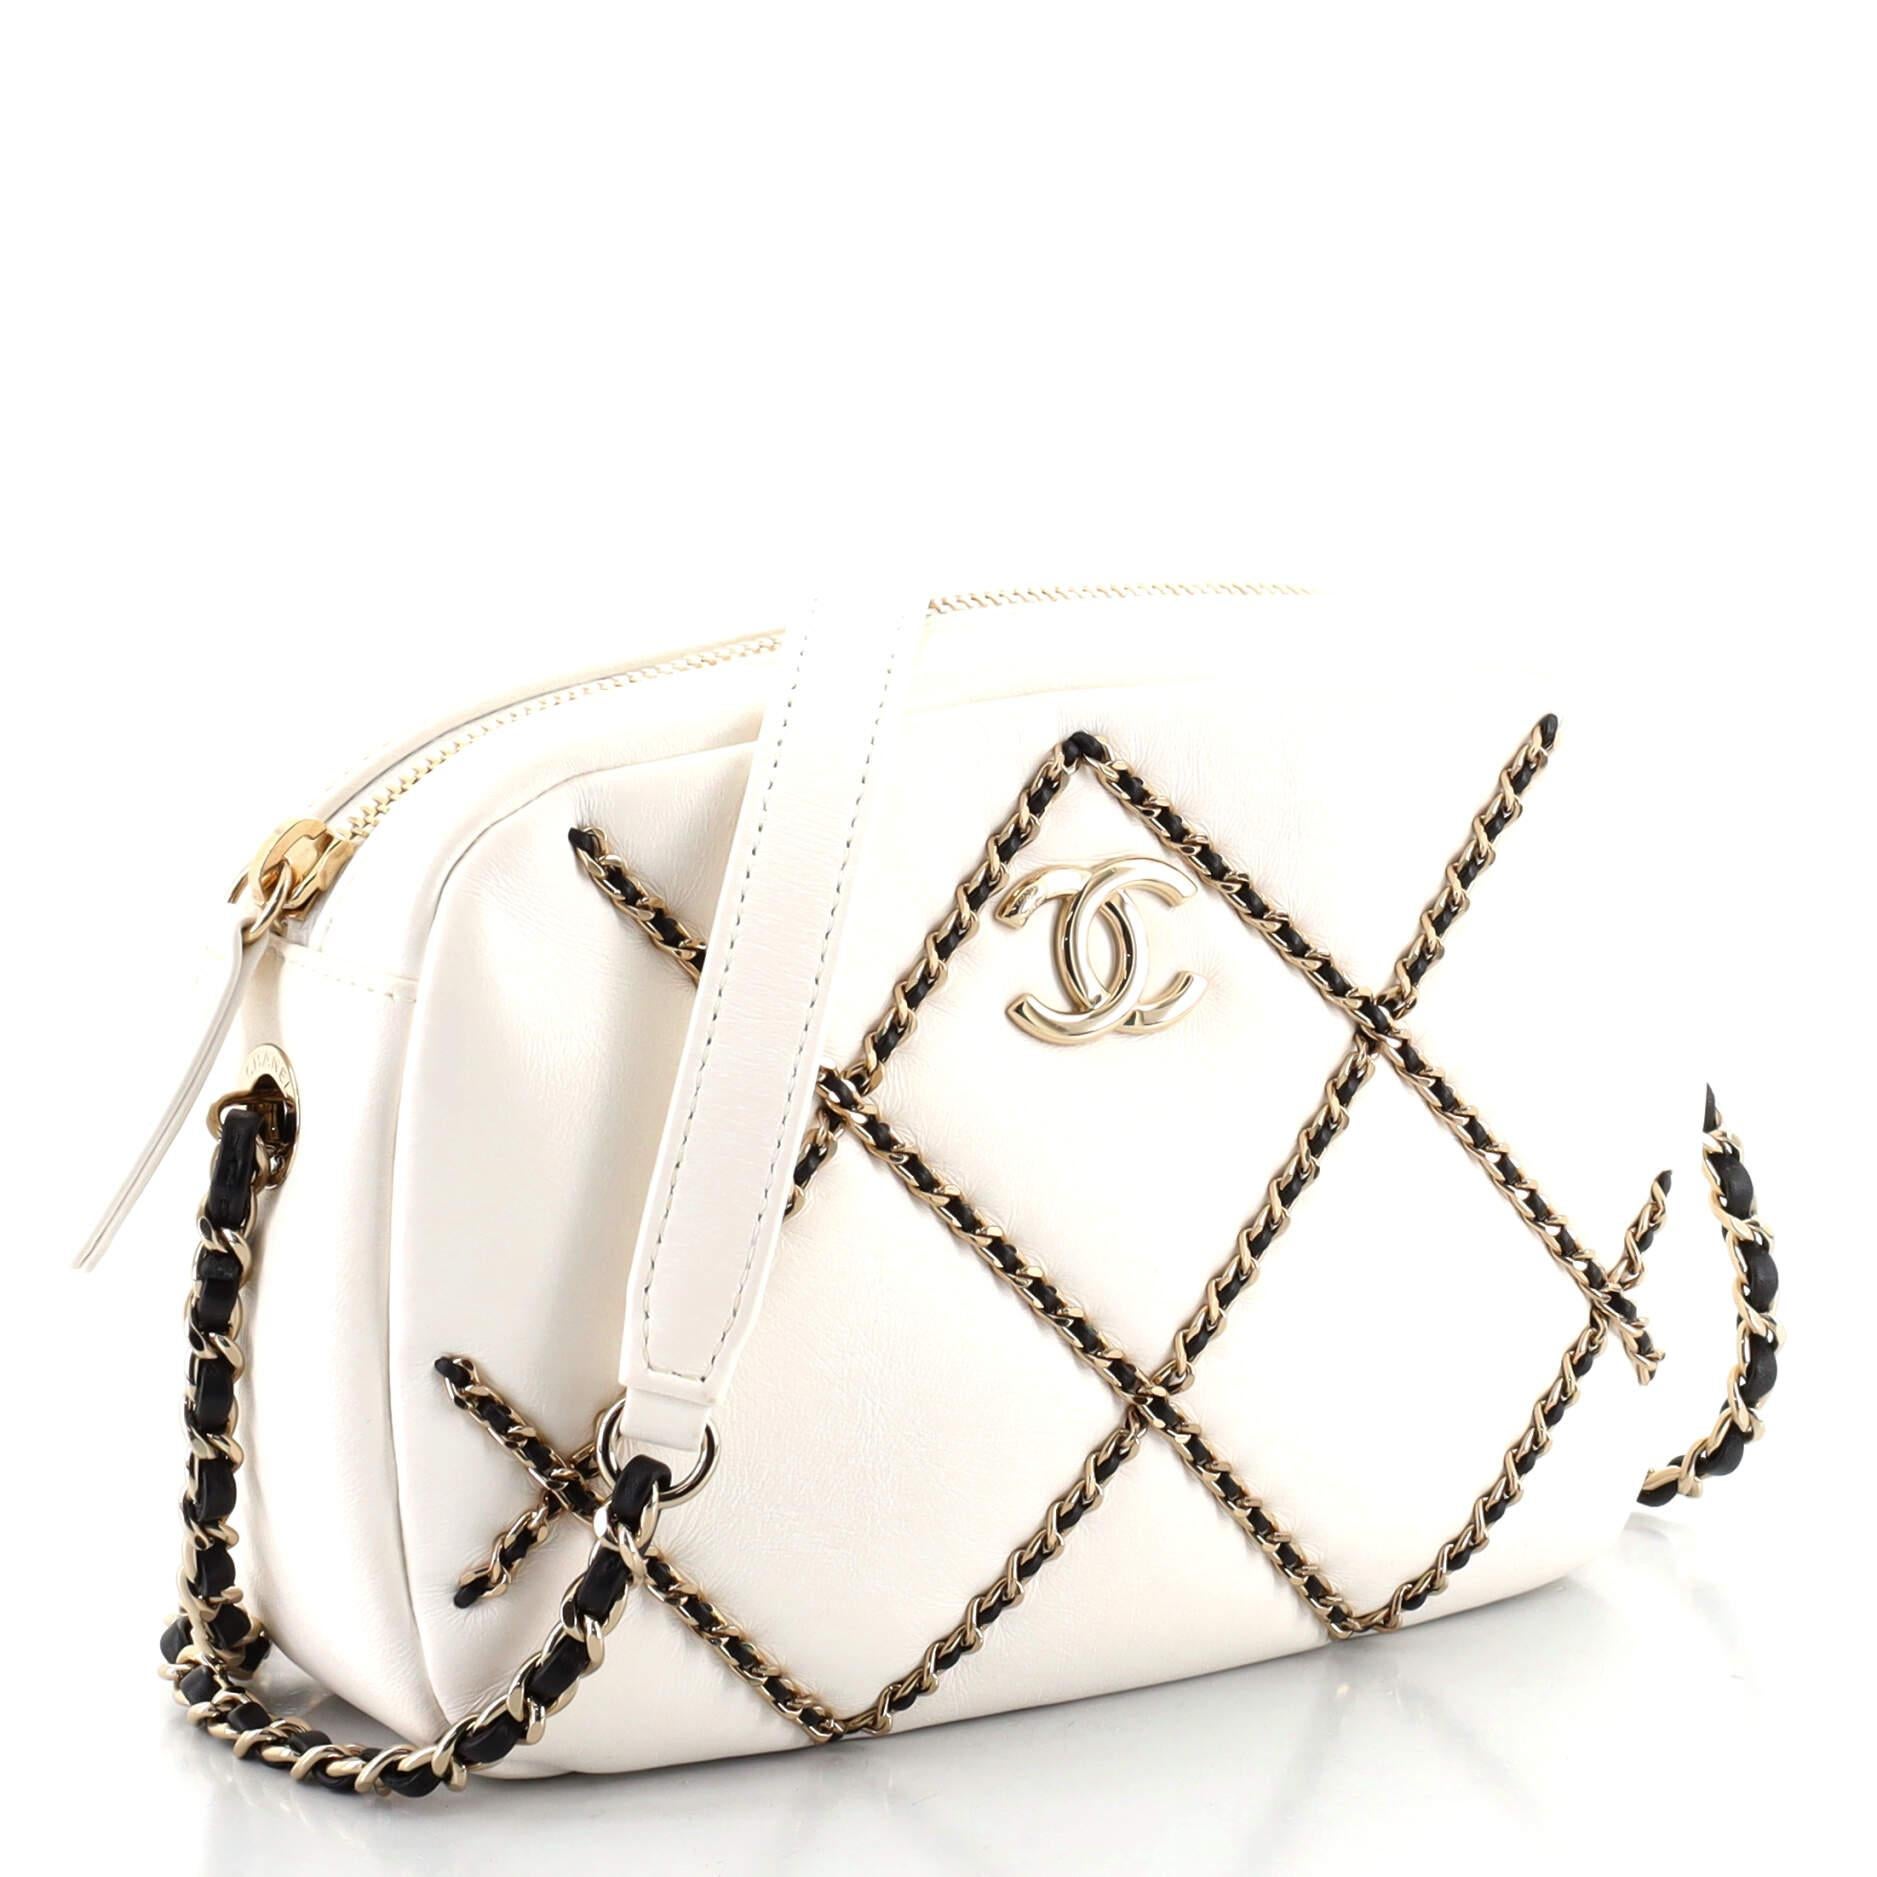 chanel entwined chain bag